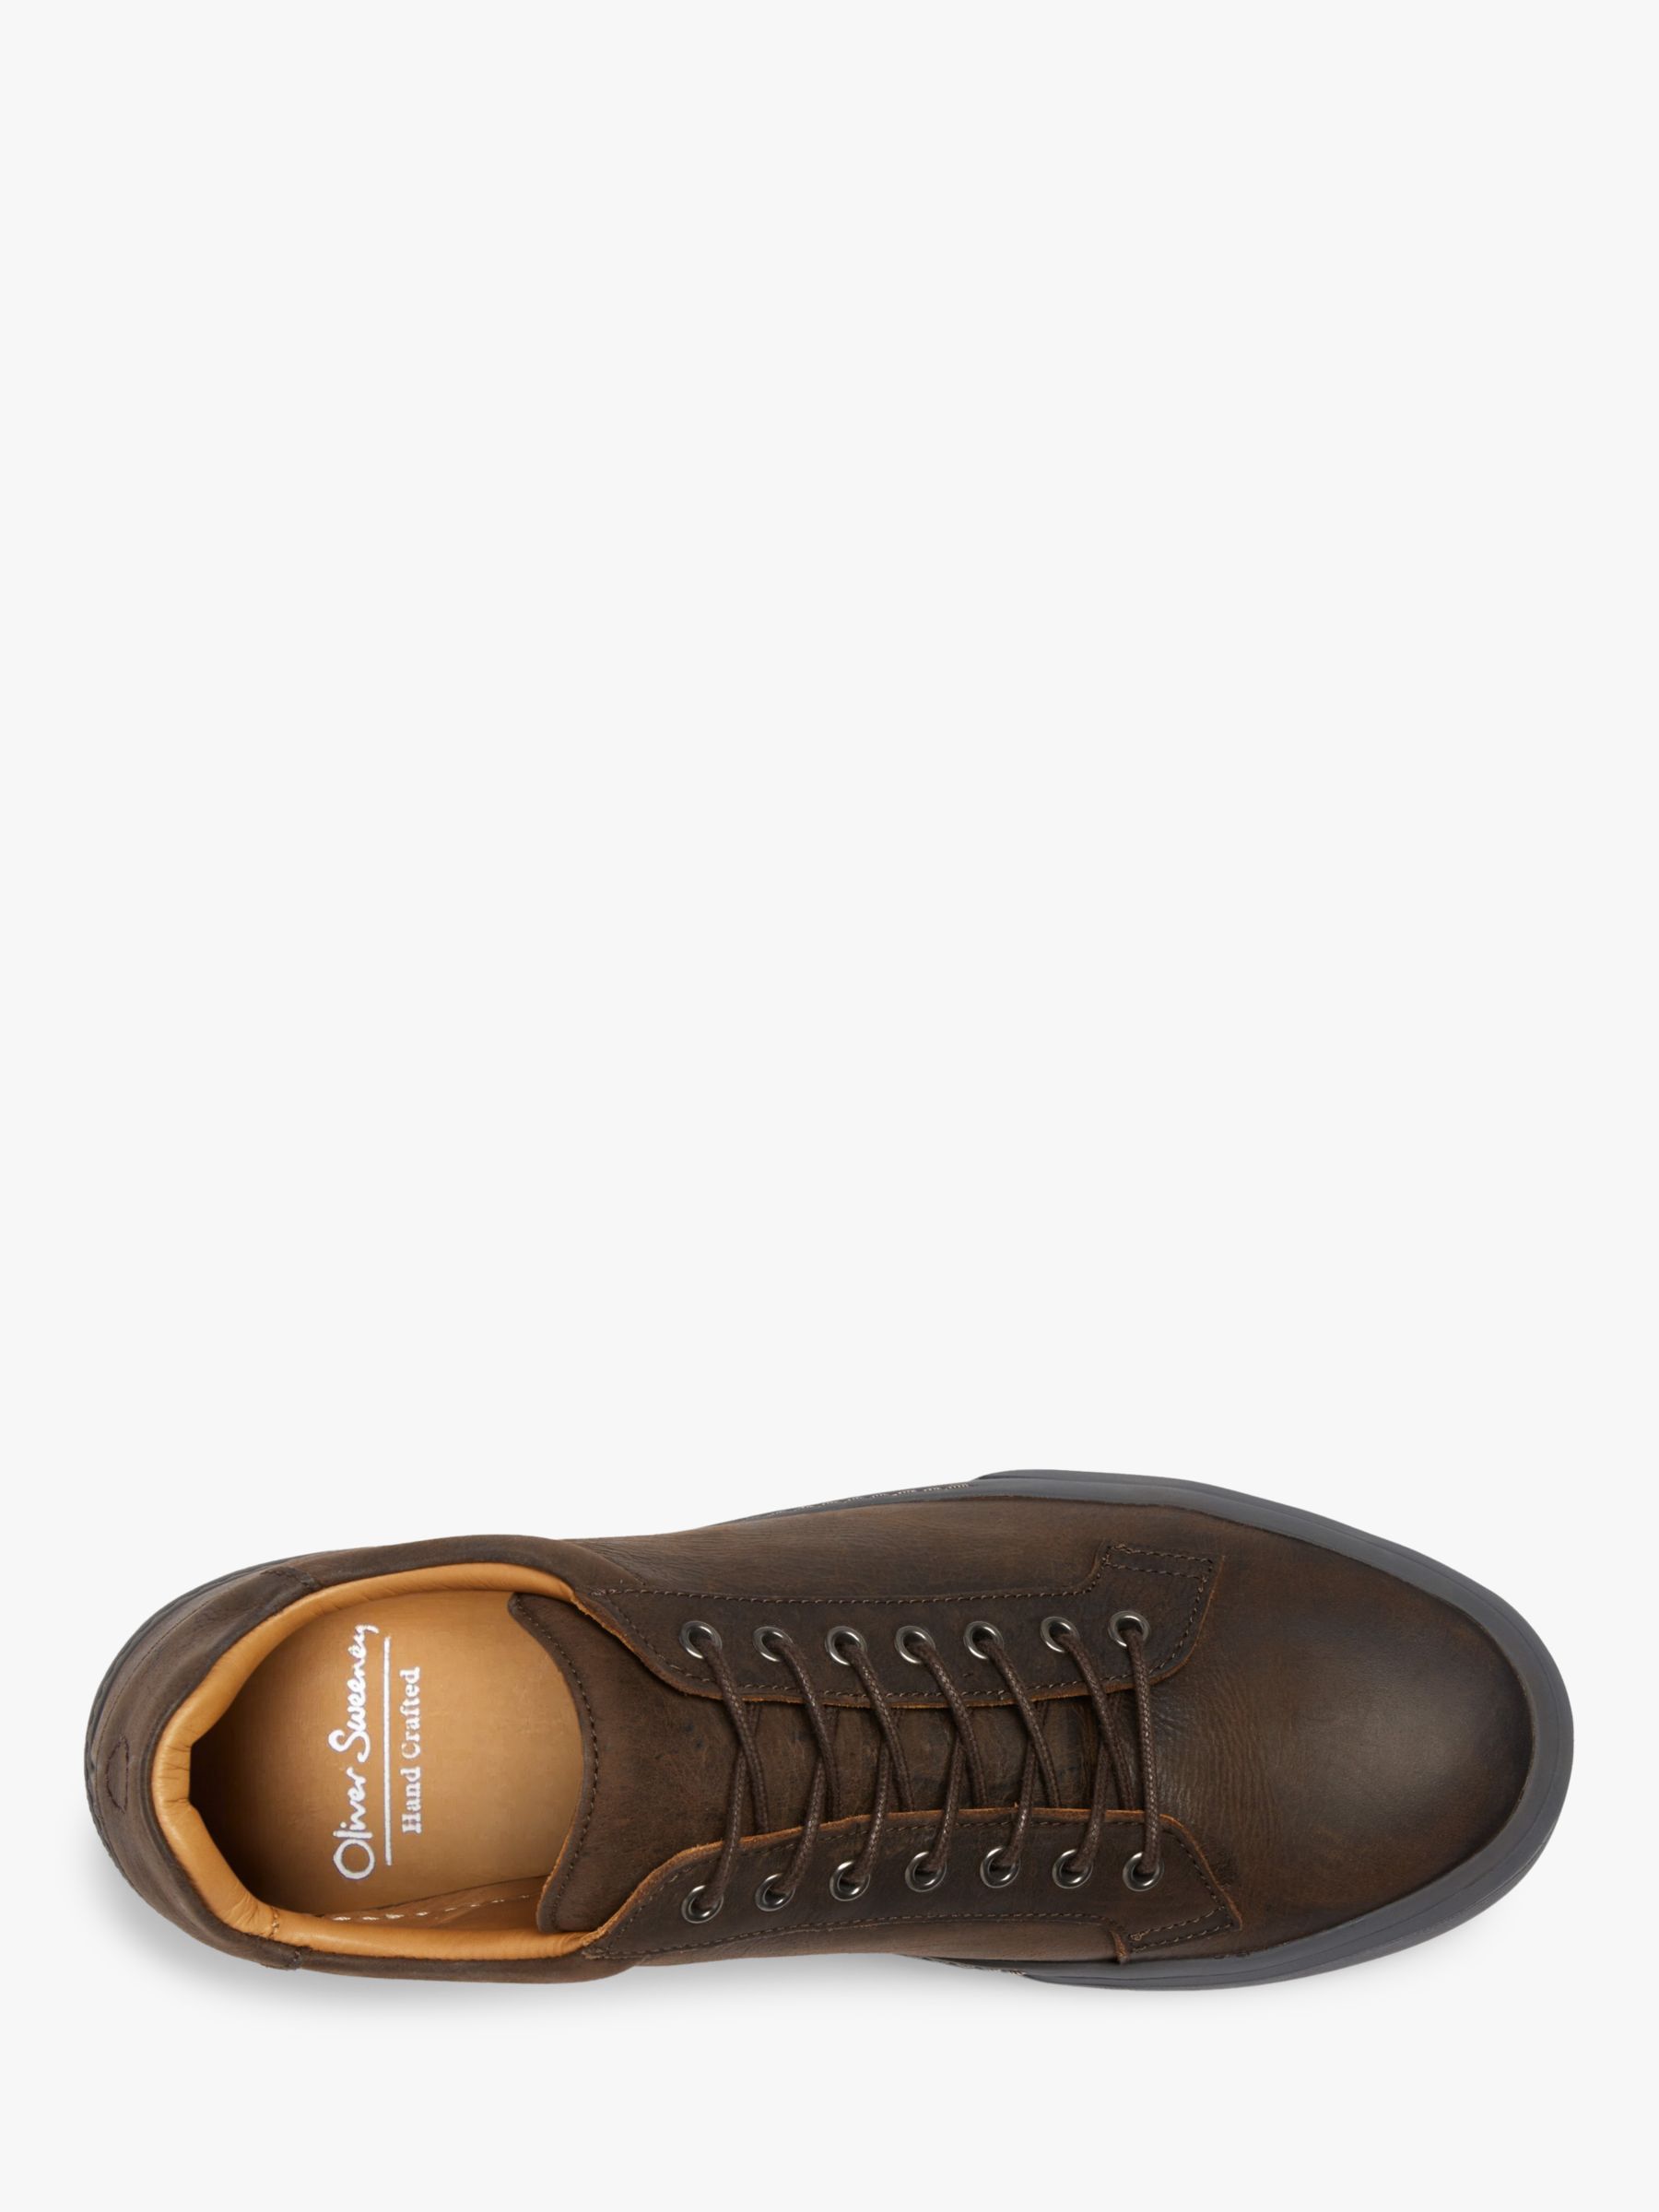 Oliver Sweeney Penacova Leather Lace Up Trainers, Brown, 7